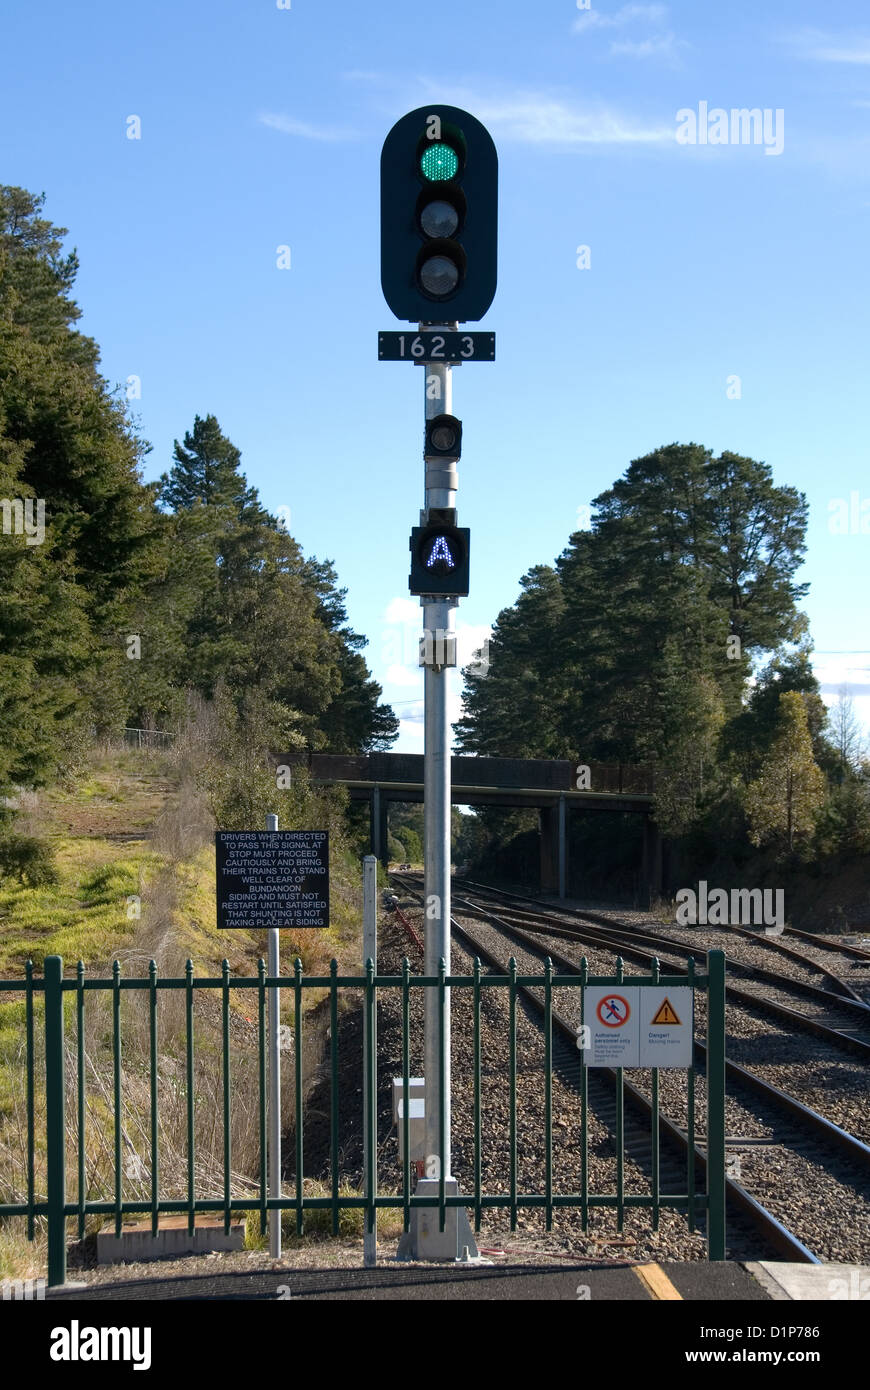 A signal post on the main Sydney to Melbourne rail line Stock Photo